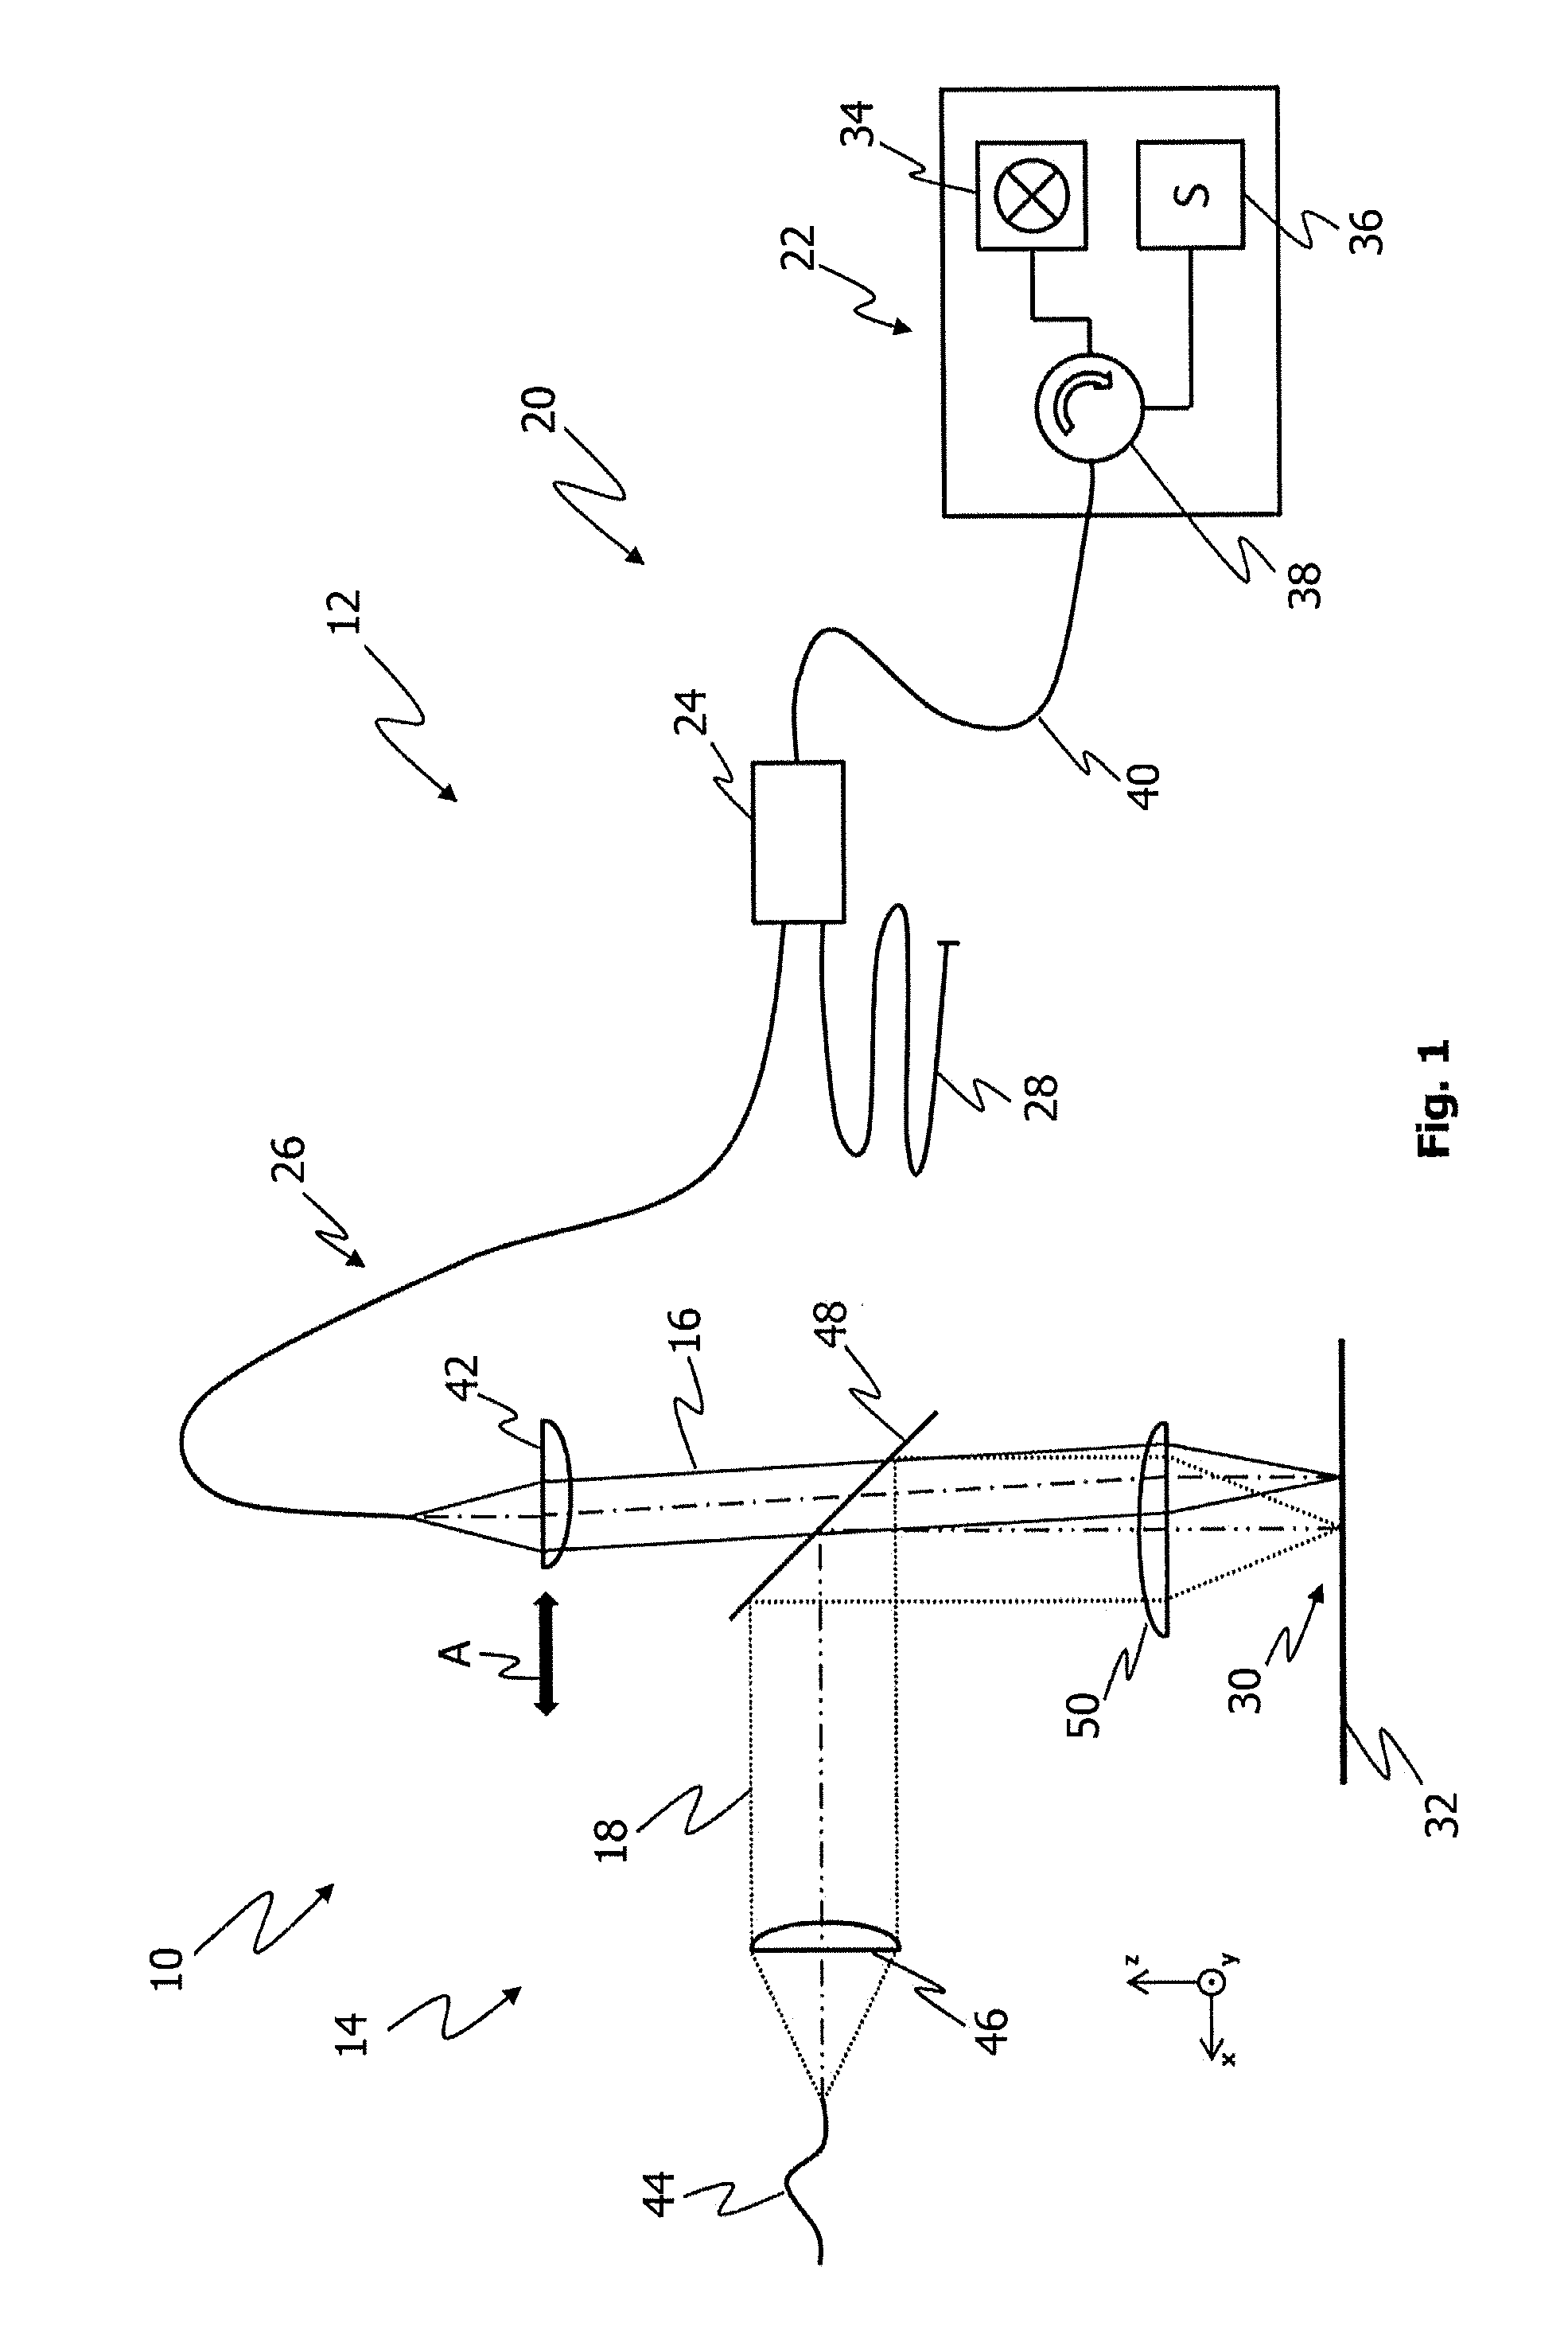 Measurement device for a laser processing system and a method for performing position measurements by means of a measurement beam on a workpiece